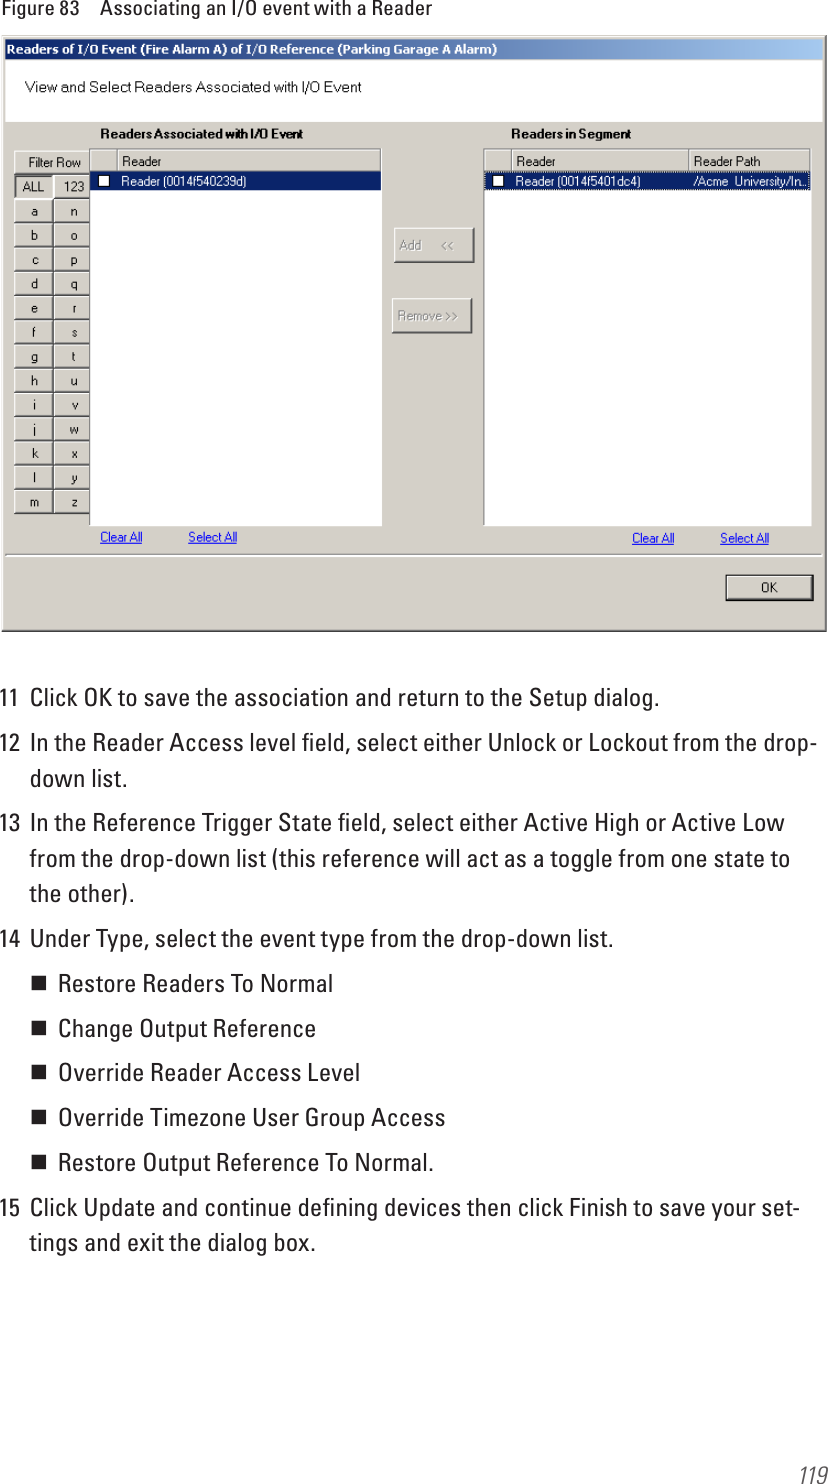 119Figure 83  Associating an I/O event with a Reader11  Click OK to save the association and return to the Setup dialog.12  In the Reader Access level ﬁeld, select either Unlock or Lockout from the drop-down list.13  In the Reference Trigger State ﬁeld, select either Active High or Active Low from the drop-down list (this reference will act as a toggle from one state to the other).14  Under Type, select the event type from the drop-down list. Restore Readers To Normal Change Output Reference Override Reader Access Level Override Timezone User Group Access Restore Output Reference To Normal.15  Click Update and continue deﬁning devices then click Finish to save your set-tings and exit the dialog box.